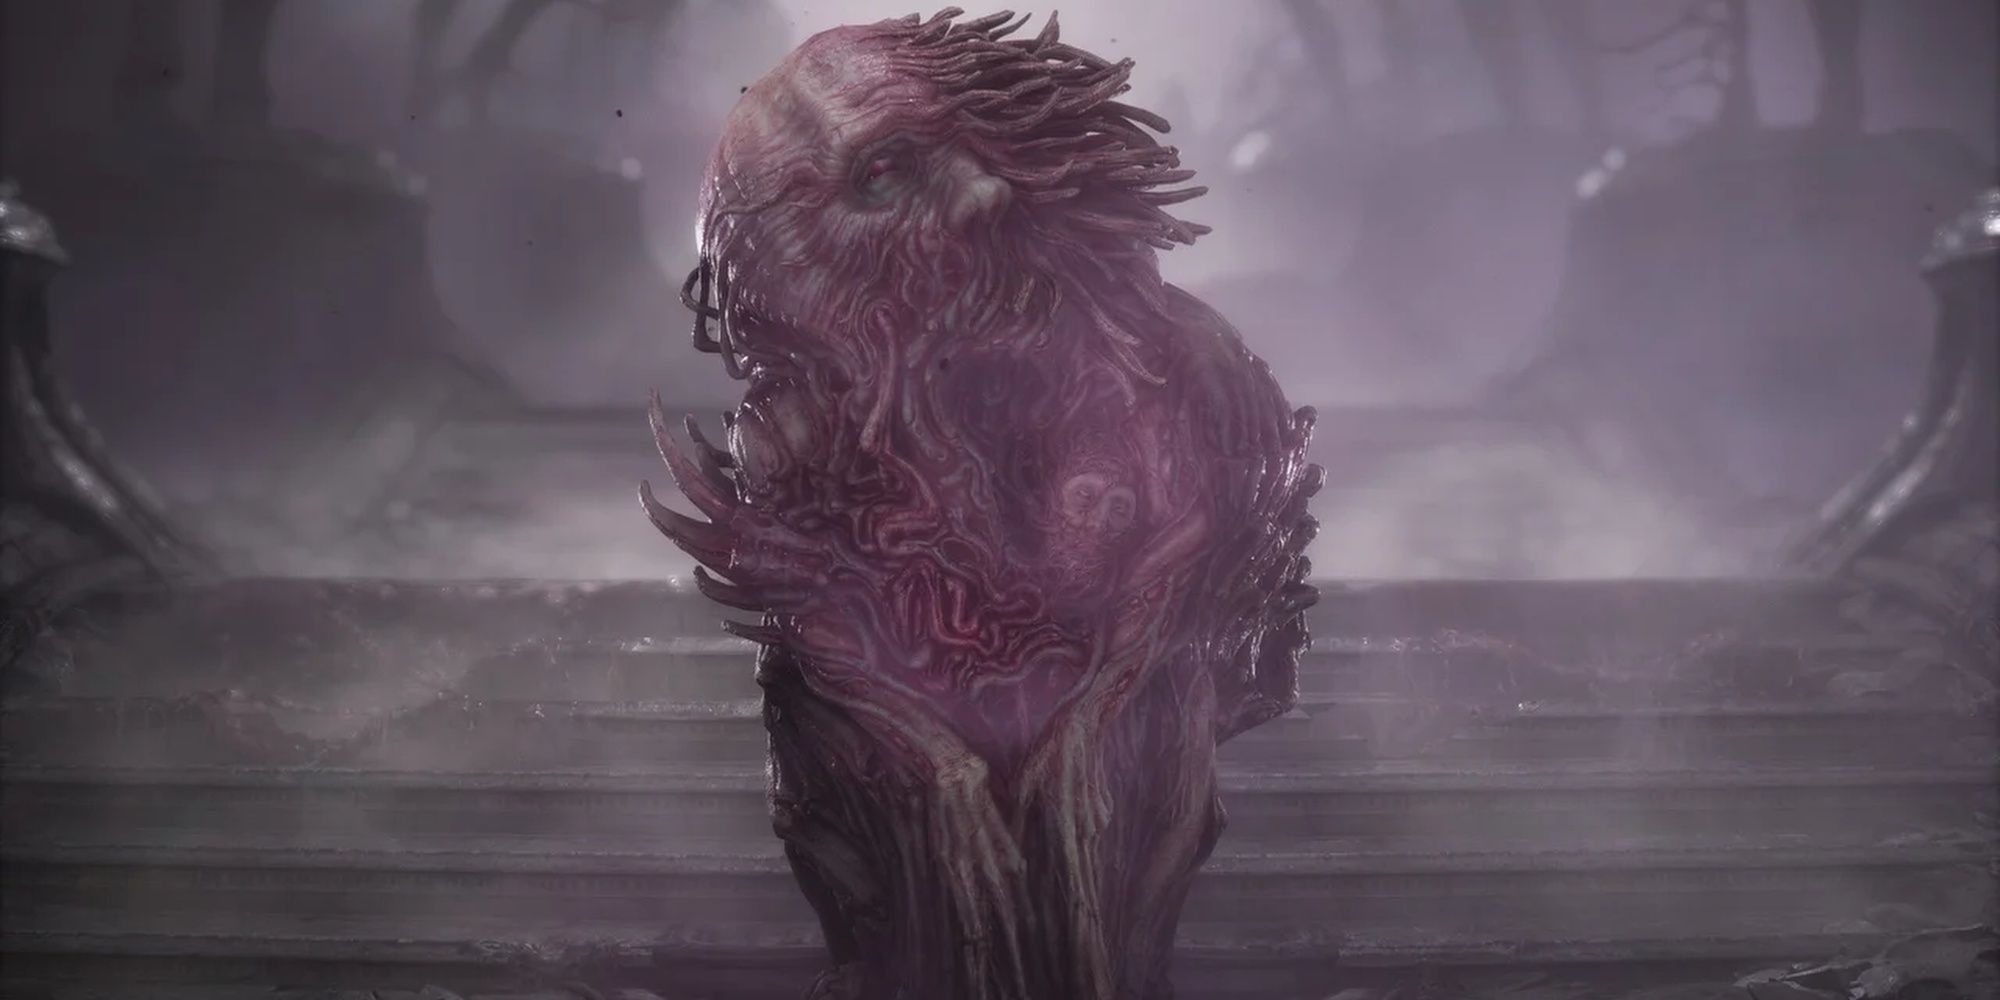 Scorn: The Protagonist Of The Game Trapped Inside A Flesh Tree